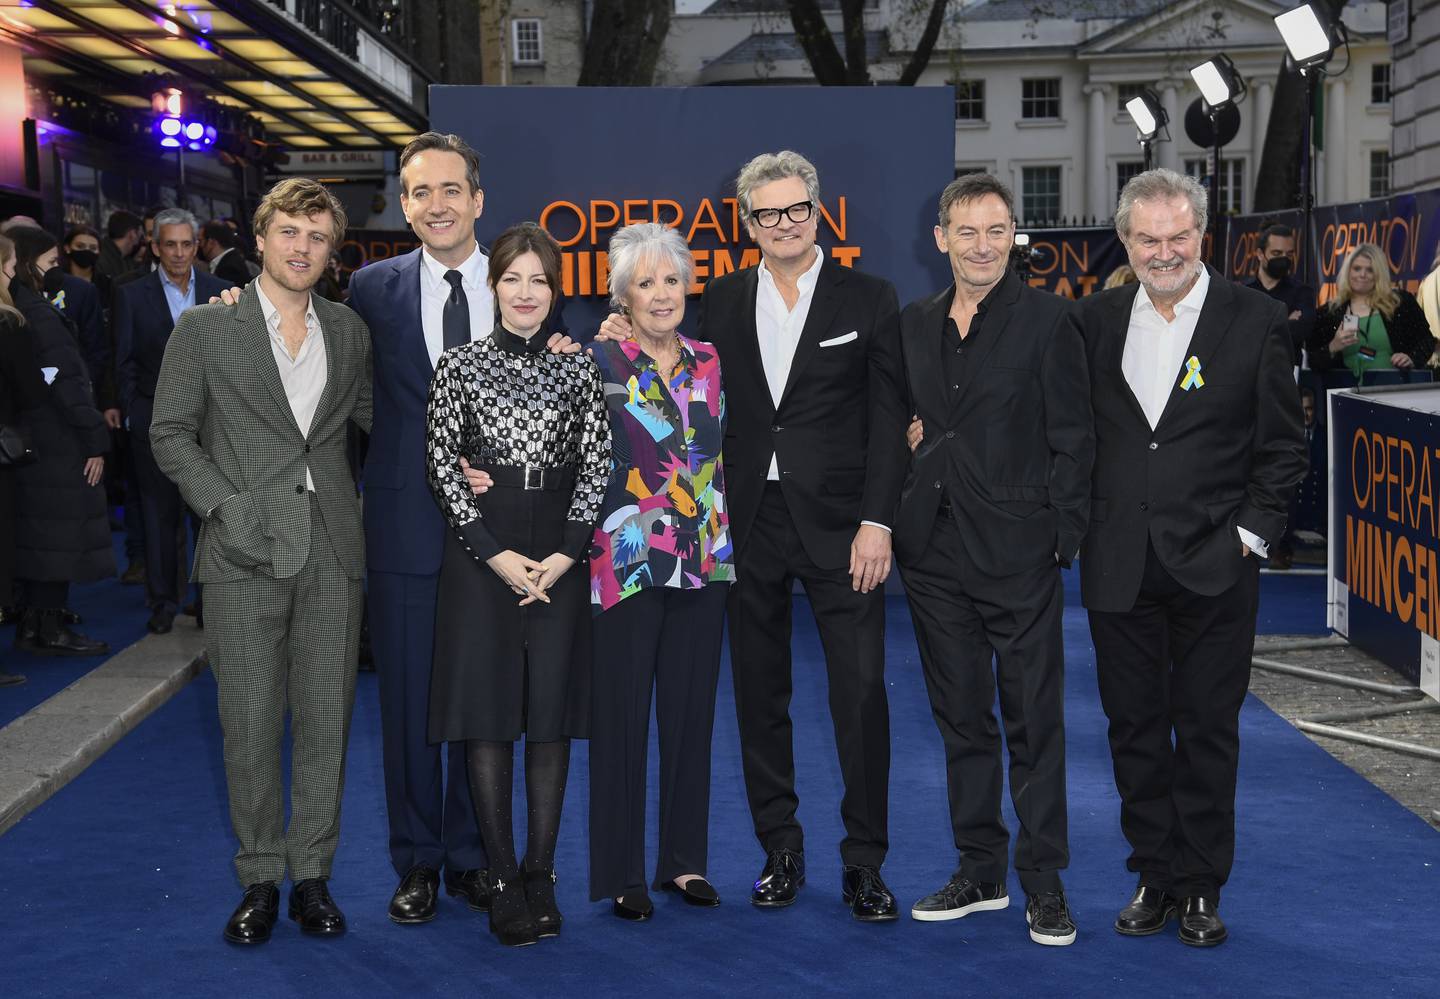 Johnny Flynn, Matthew Macfadyen, Kelly Macdonald, Penelope Wilton, Colin Firth, Jason Isaacs and John Madden at the premiere of 'Operation Mincemeat' in London. Getty Images 